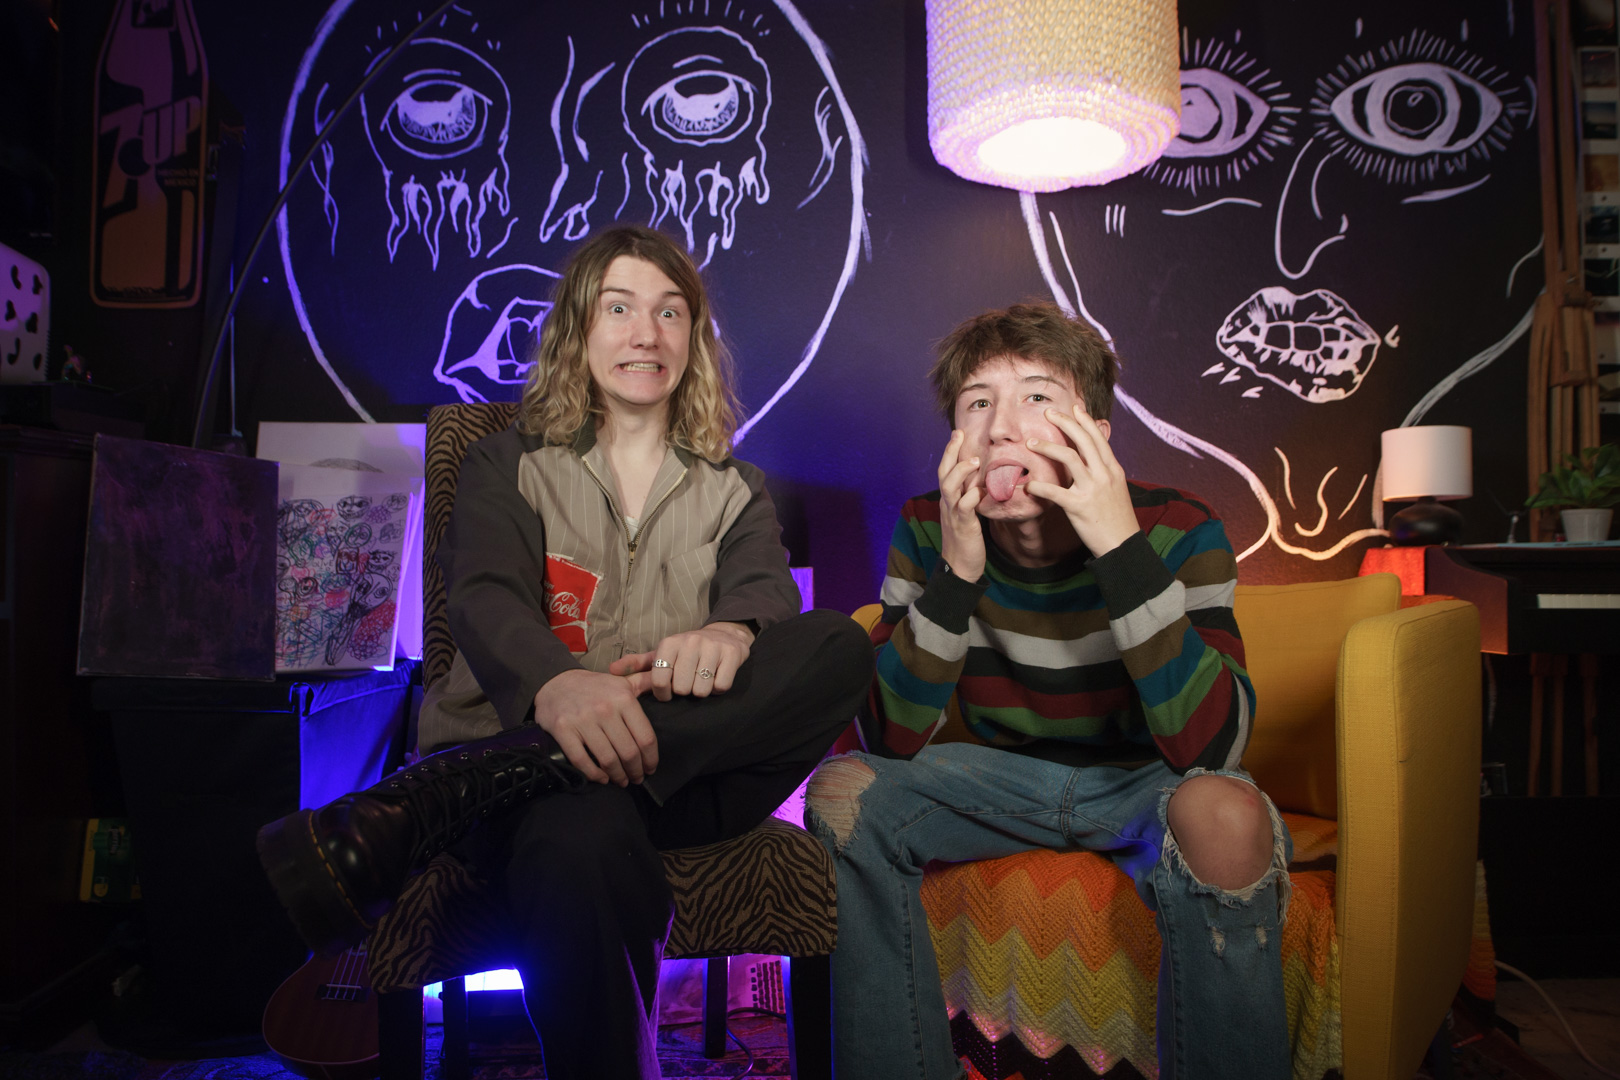 A man with long blond hair named Parker James sits next to his brother, Caden Shea in front of a mural of abstract faces Musicians and Parker James sit in front of a mural of abstract faces .